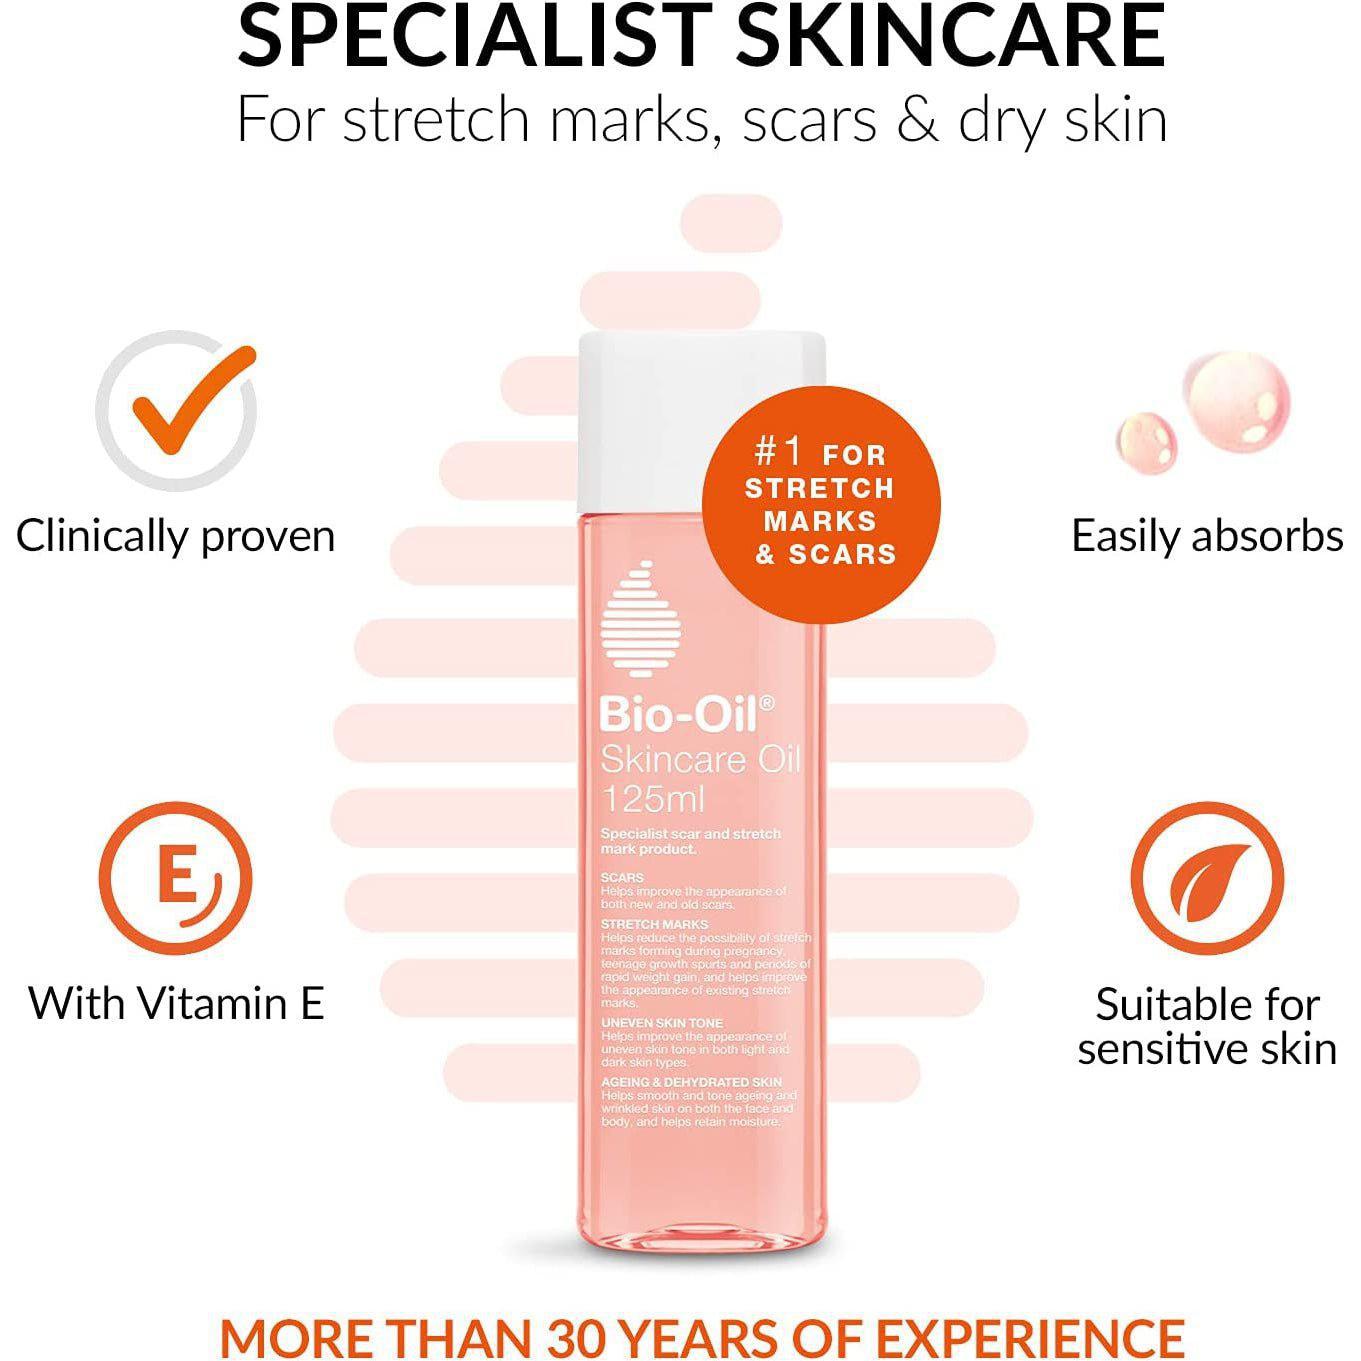 Bio-Oil Skincare Oil - Improve the Appearance of Scars, Stretch Marks and Skin Tone ,125 ml - Healthxpress.ie